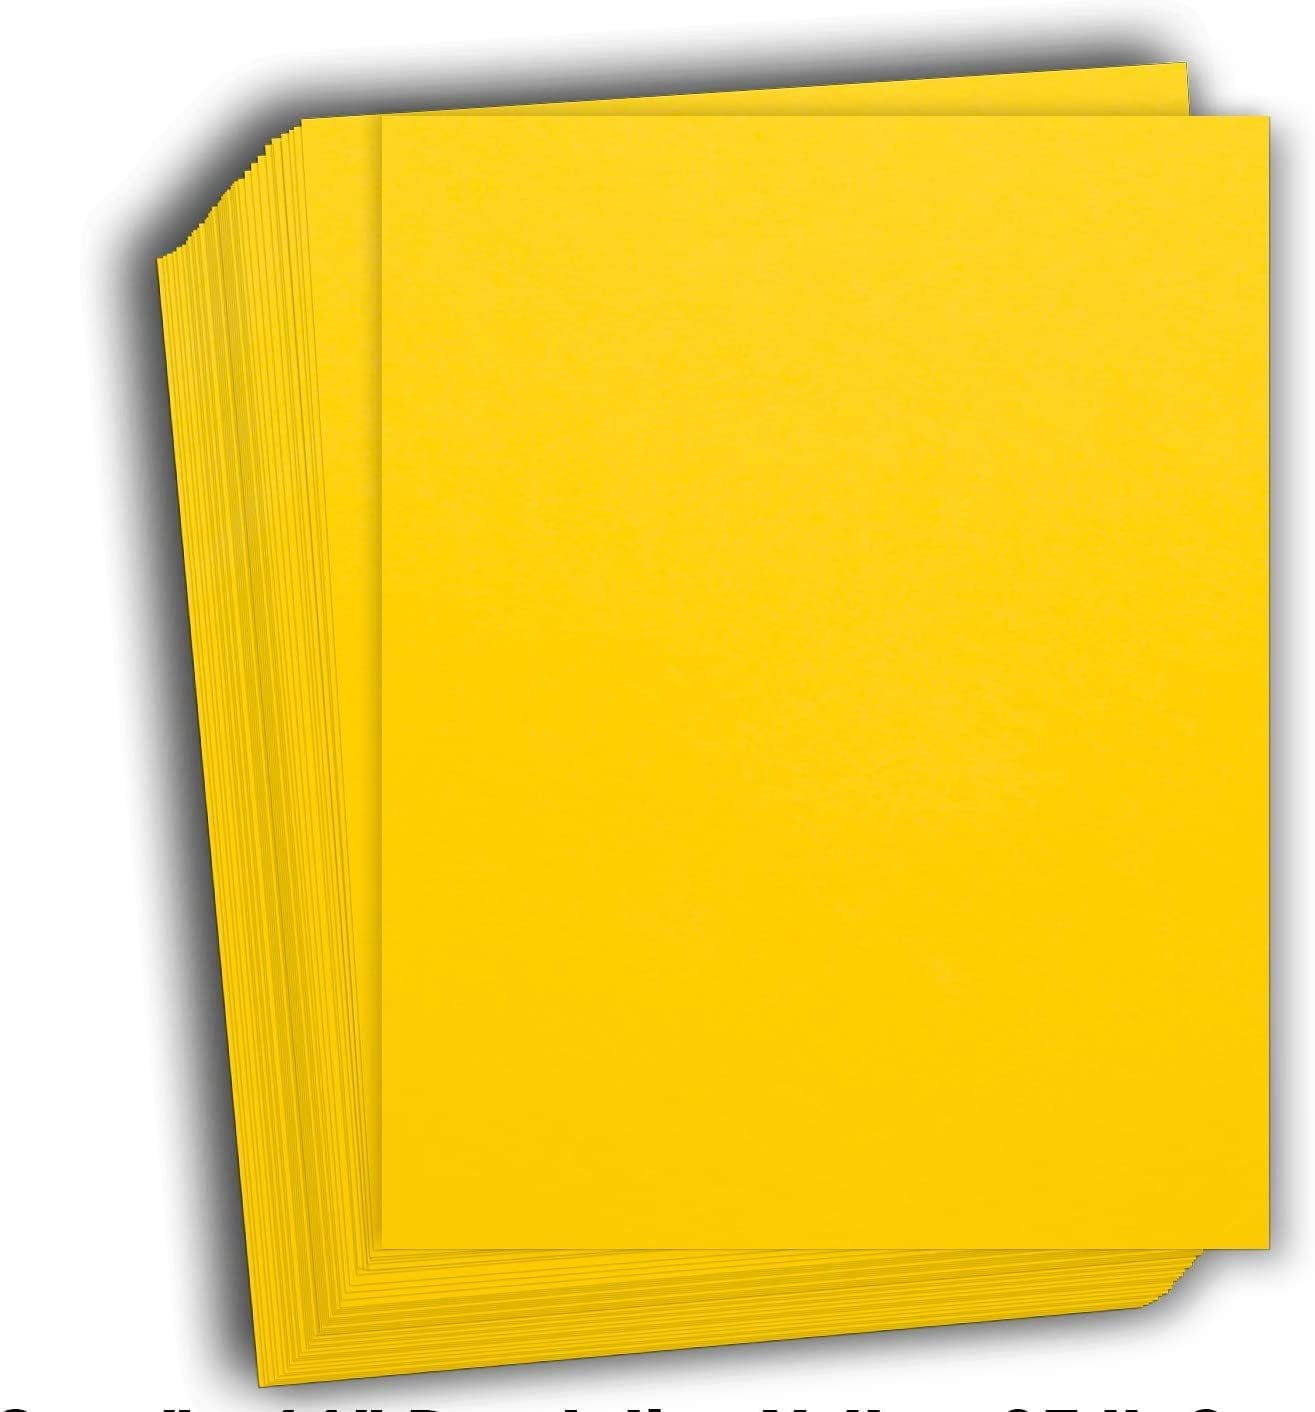 300 Bright Yellow Color Cardstock 65lb Cover Paper - 4 X 6 (4X6 Inches)  Photo|Card|Frame Size - 65 lb/pound Light Weight Cards - Quality Printable